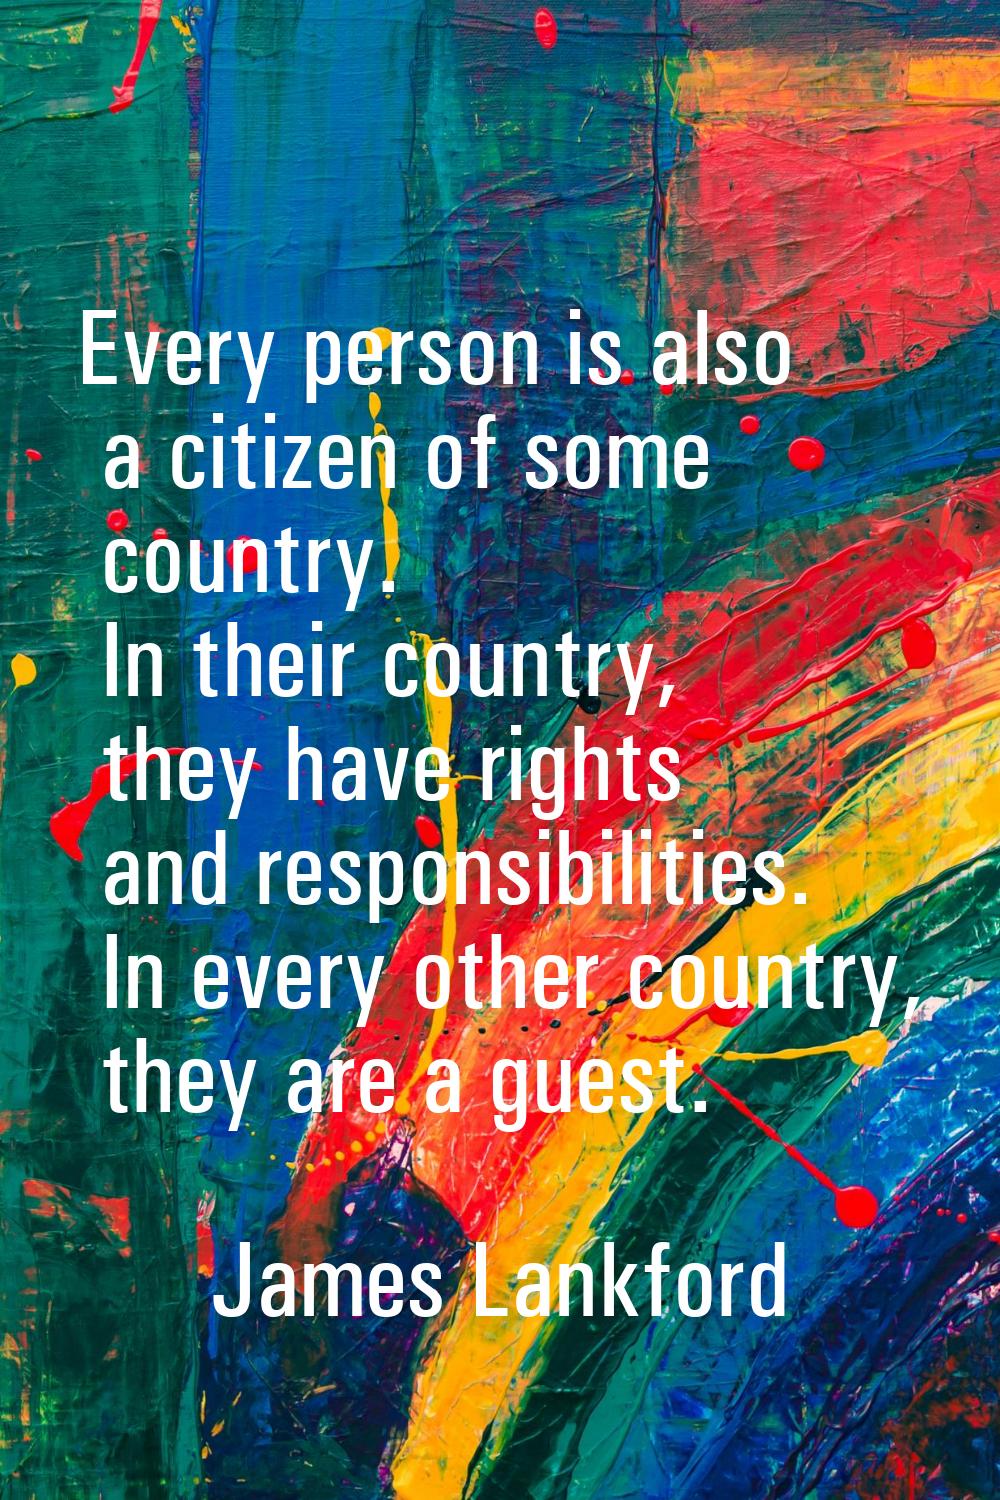 Every person is also a citizen of some country. In their country, they have rights and responsibili